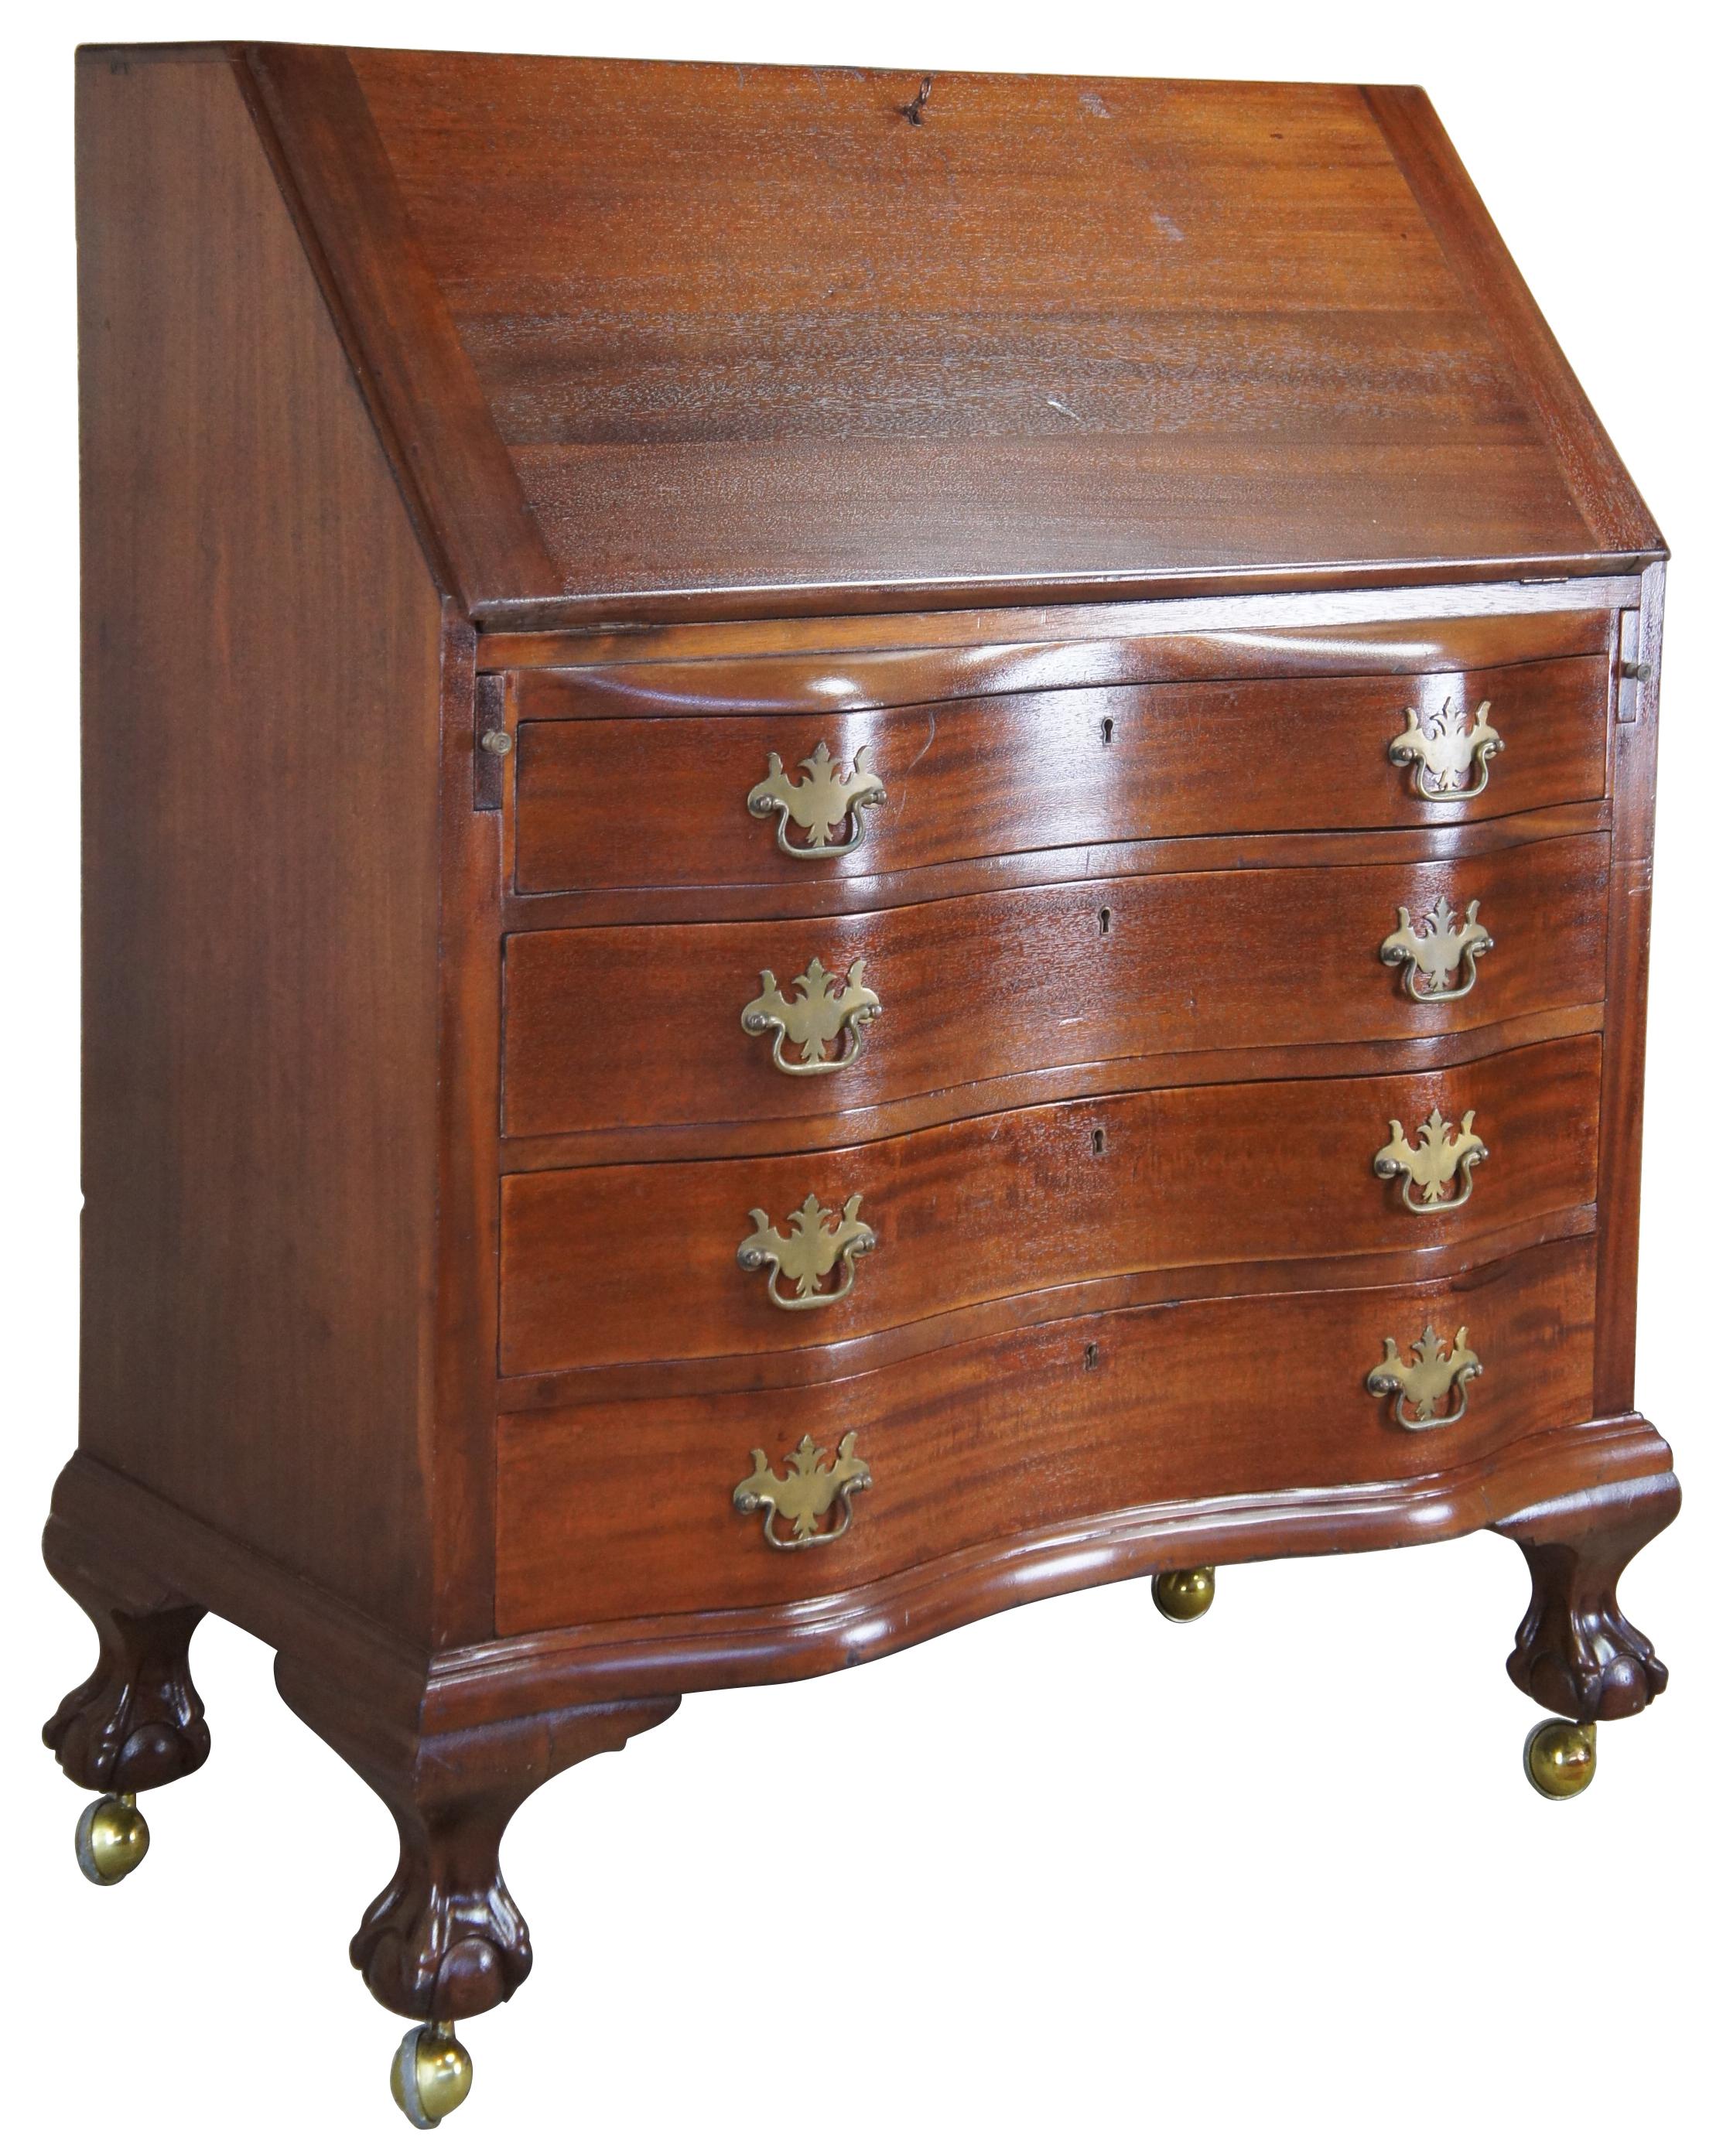 Antique mahogany secretary or writing desk, circa 1930s. Featuring a flip top that opens to multiple drawers, file storage and hidden compartments. The dresser or chest is constructed with an oxbow front with four drawers over ball and claw feet.
 